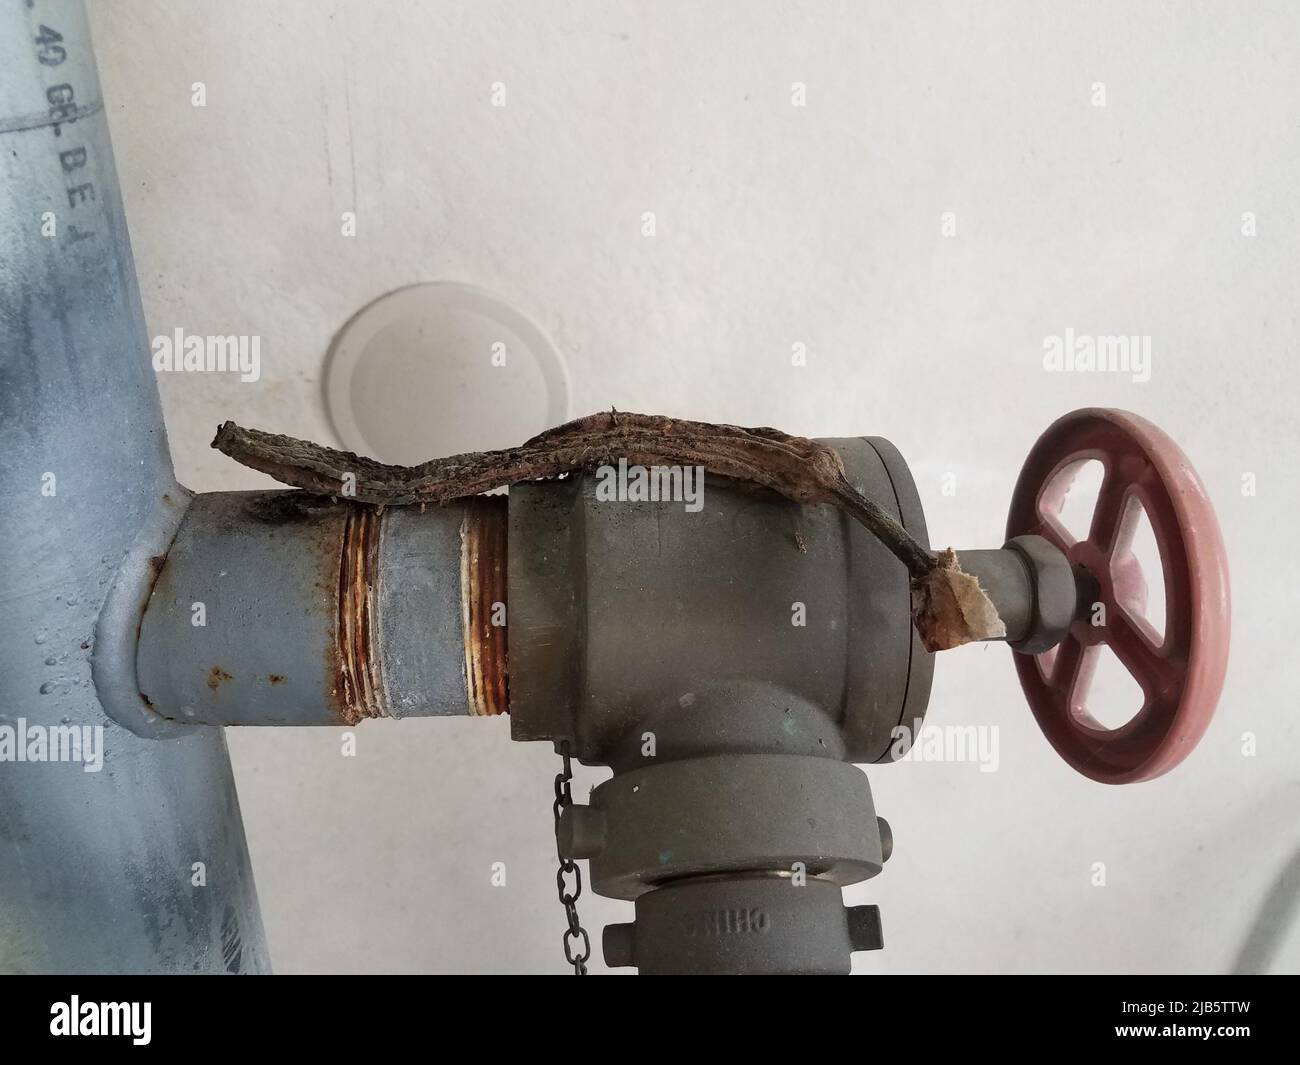 disgusting rotten or decaying dry banana peel on metal pipe. Stock Photo